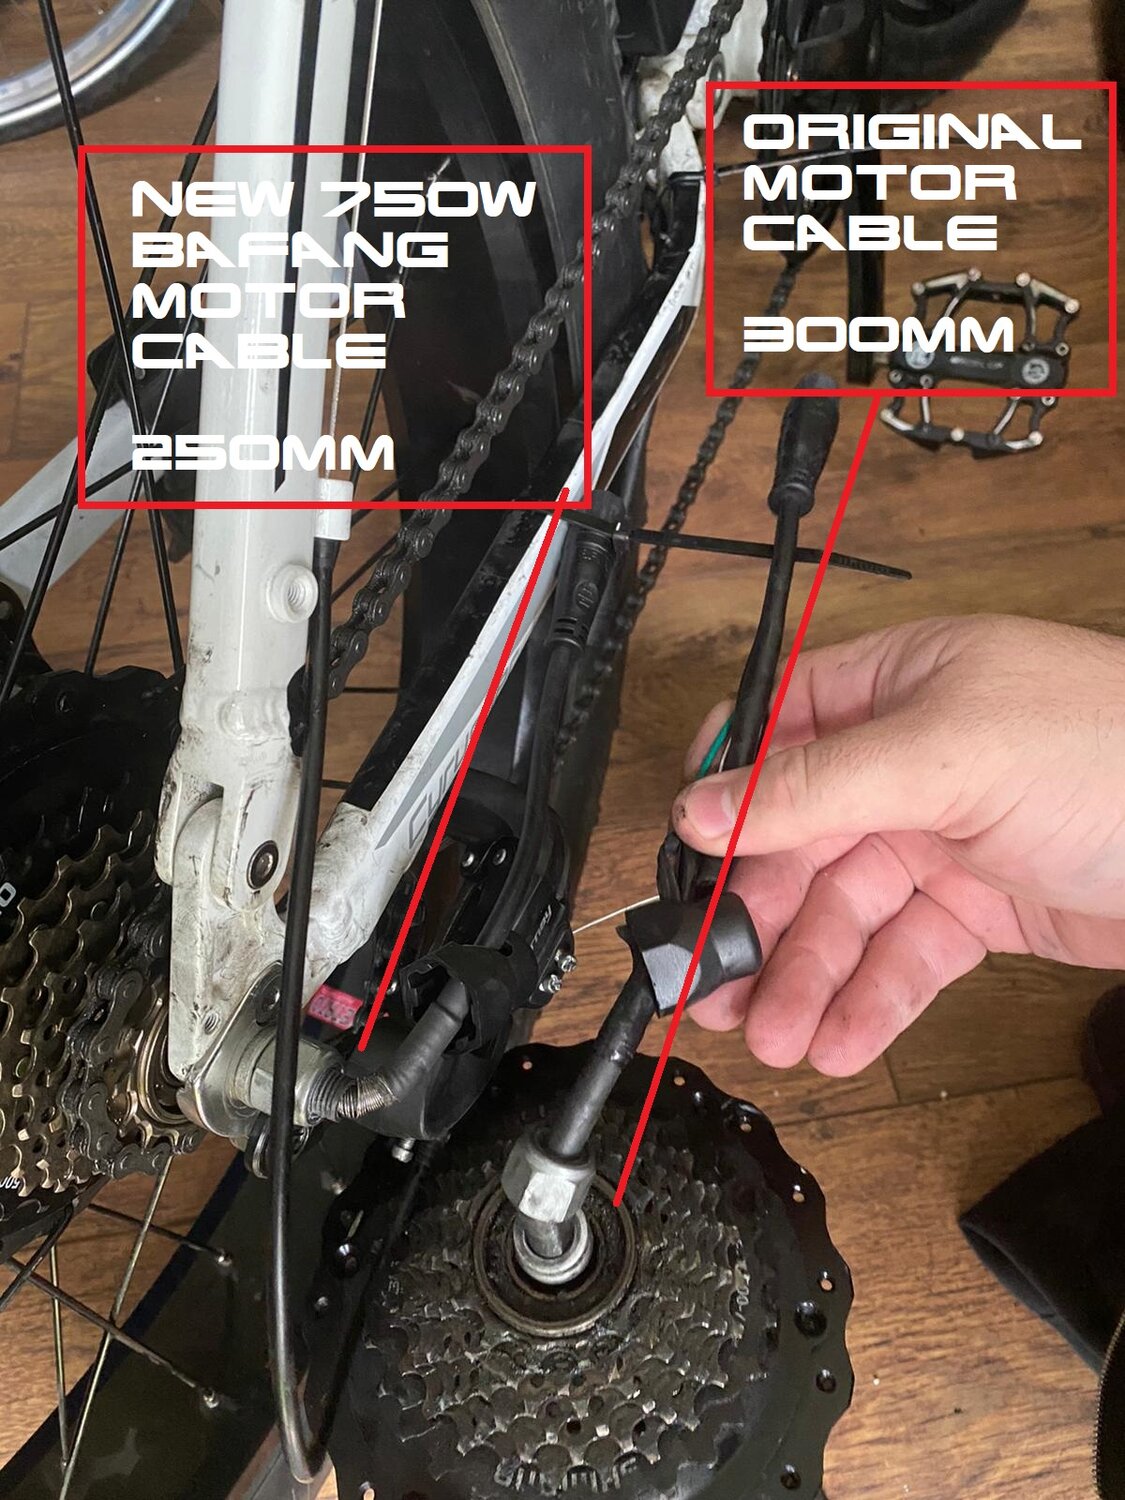 Motor Cable too short.jpg